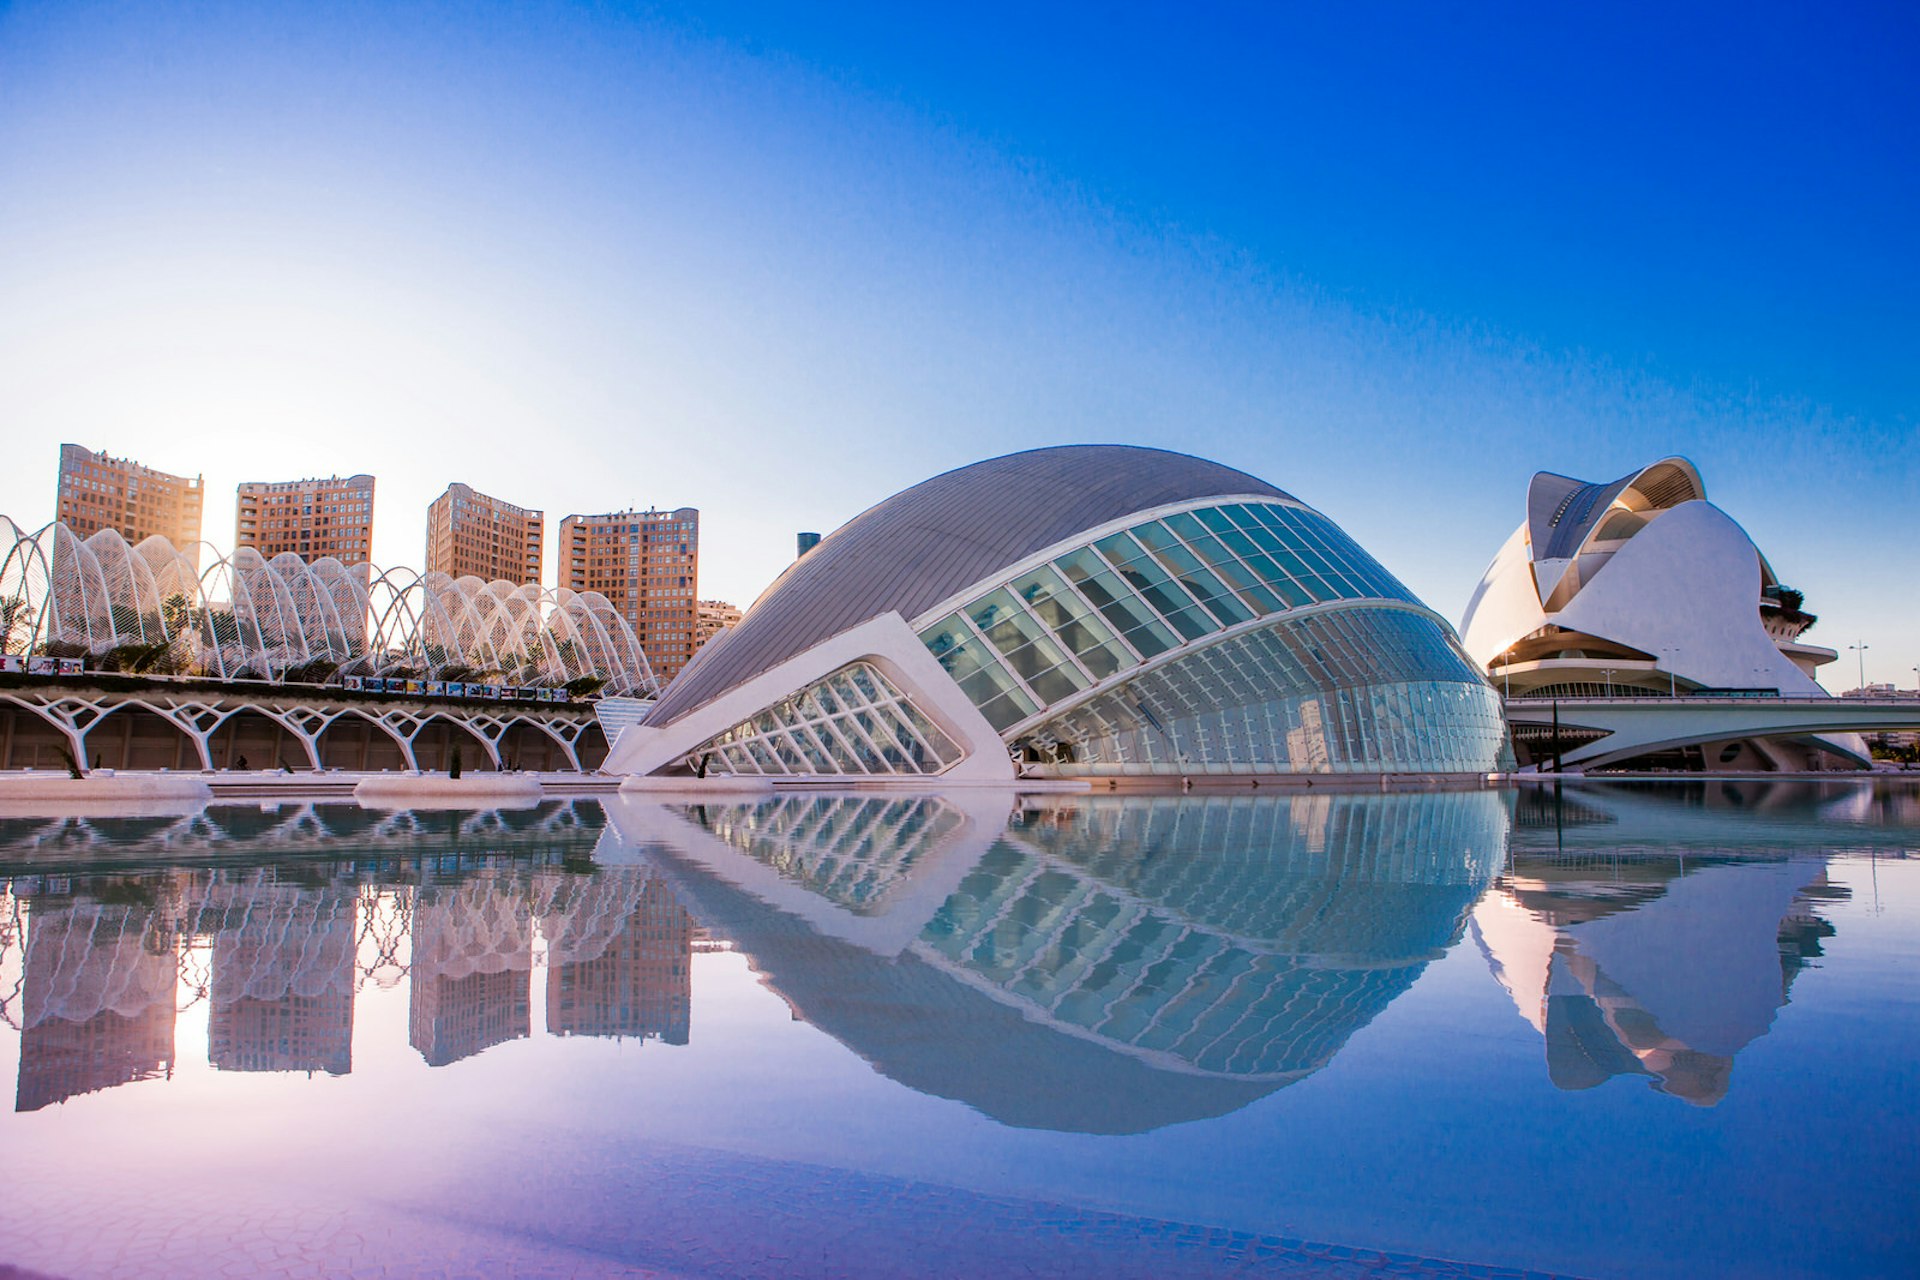 City of Arts and Sciences, Valencia © Laura Grier / Getty Images